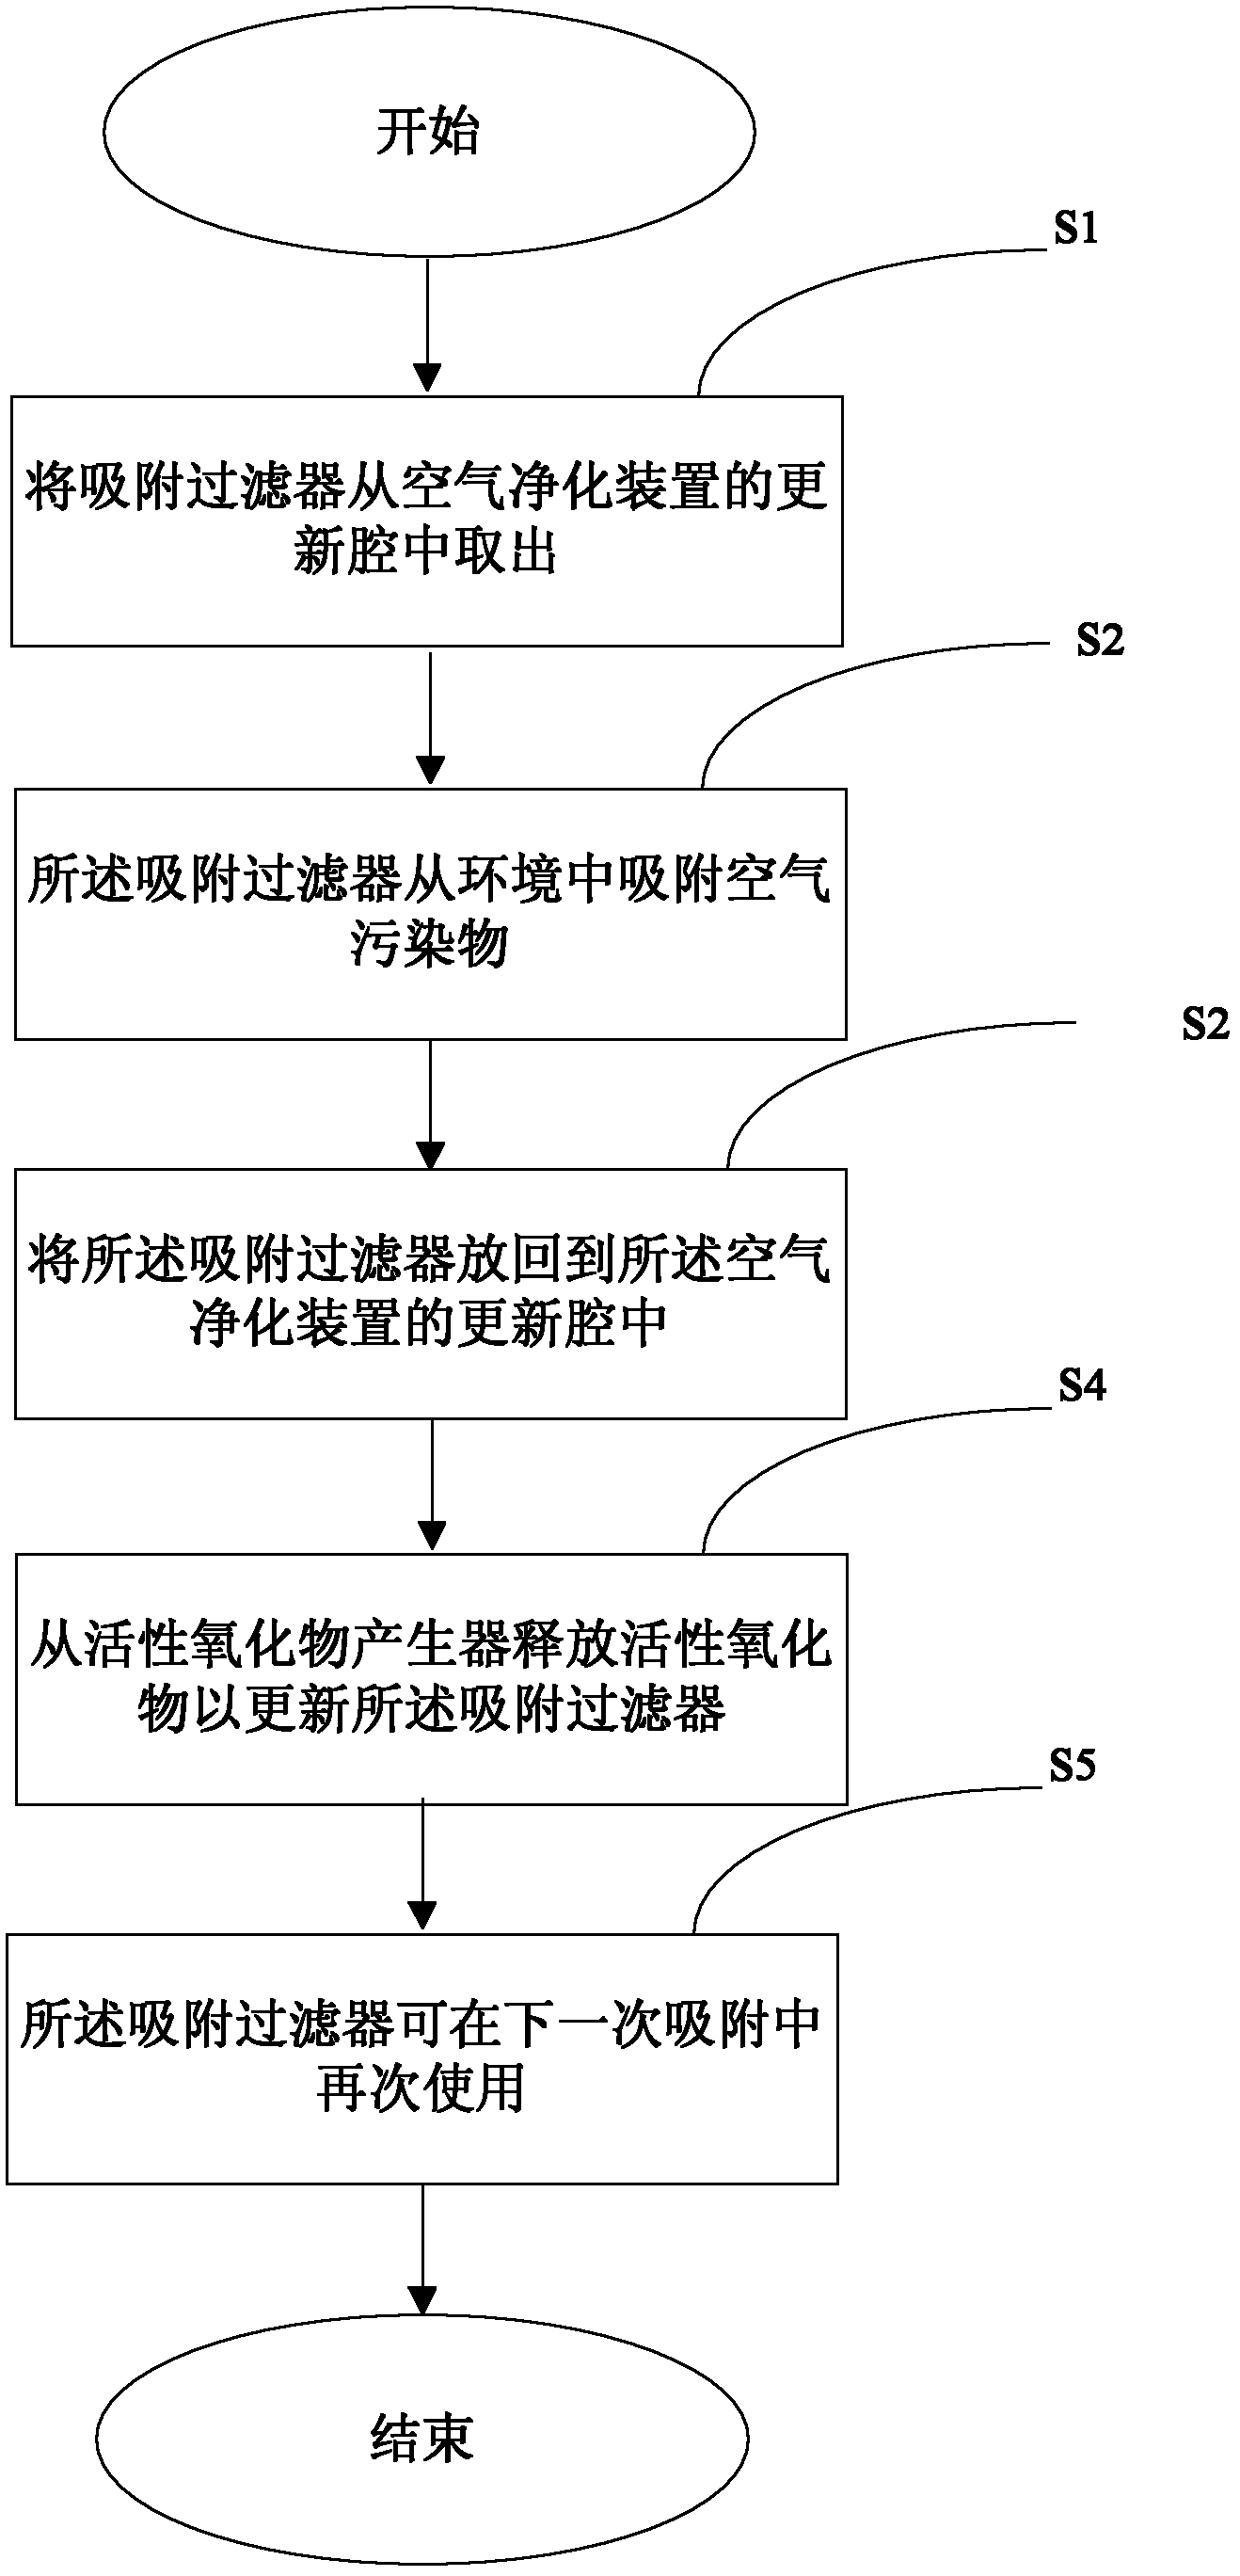 Sequencing air cleaning rejuvenation system